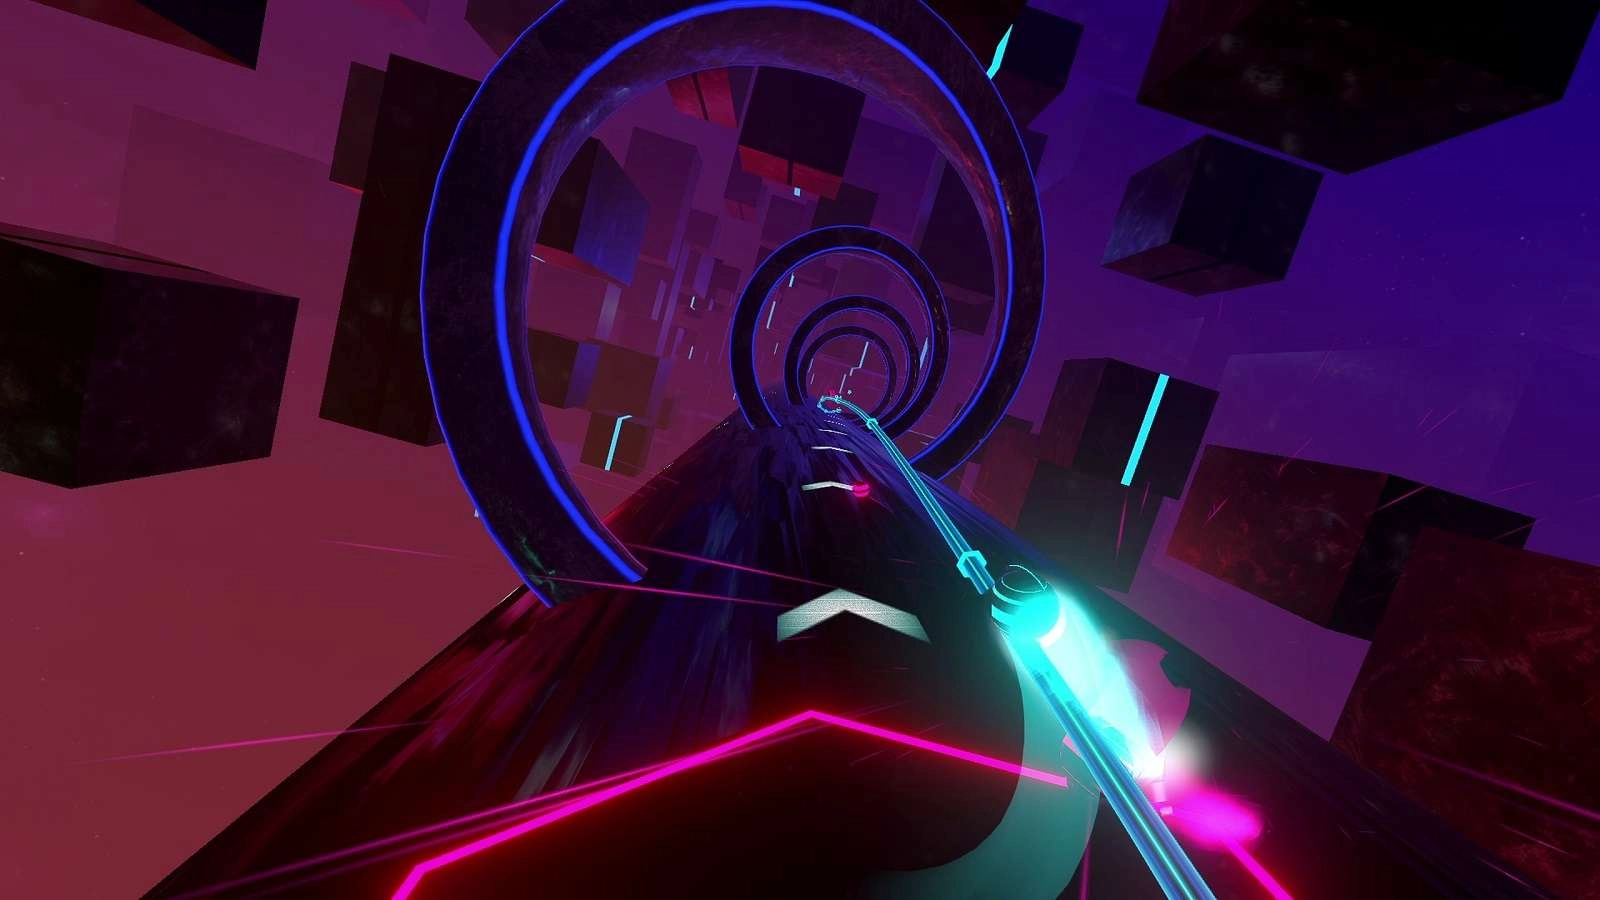 Synth Riders Spiral Mode Screenshot
